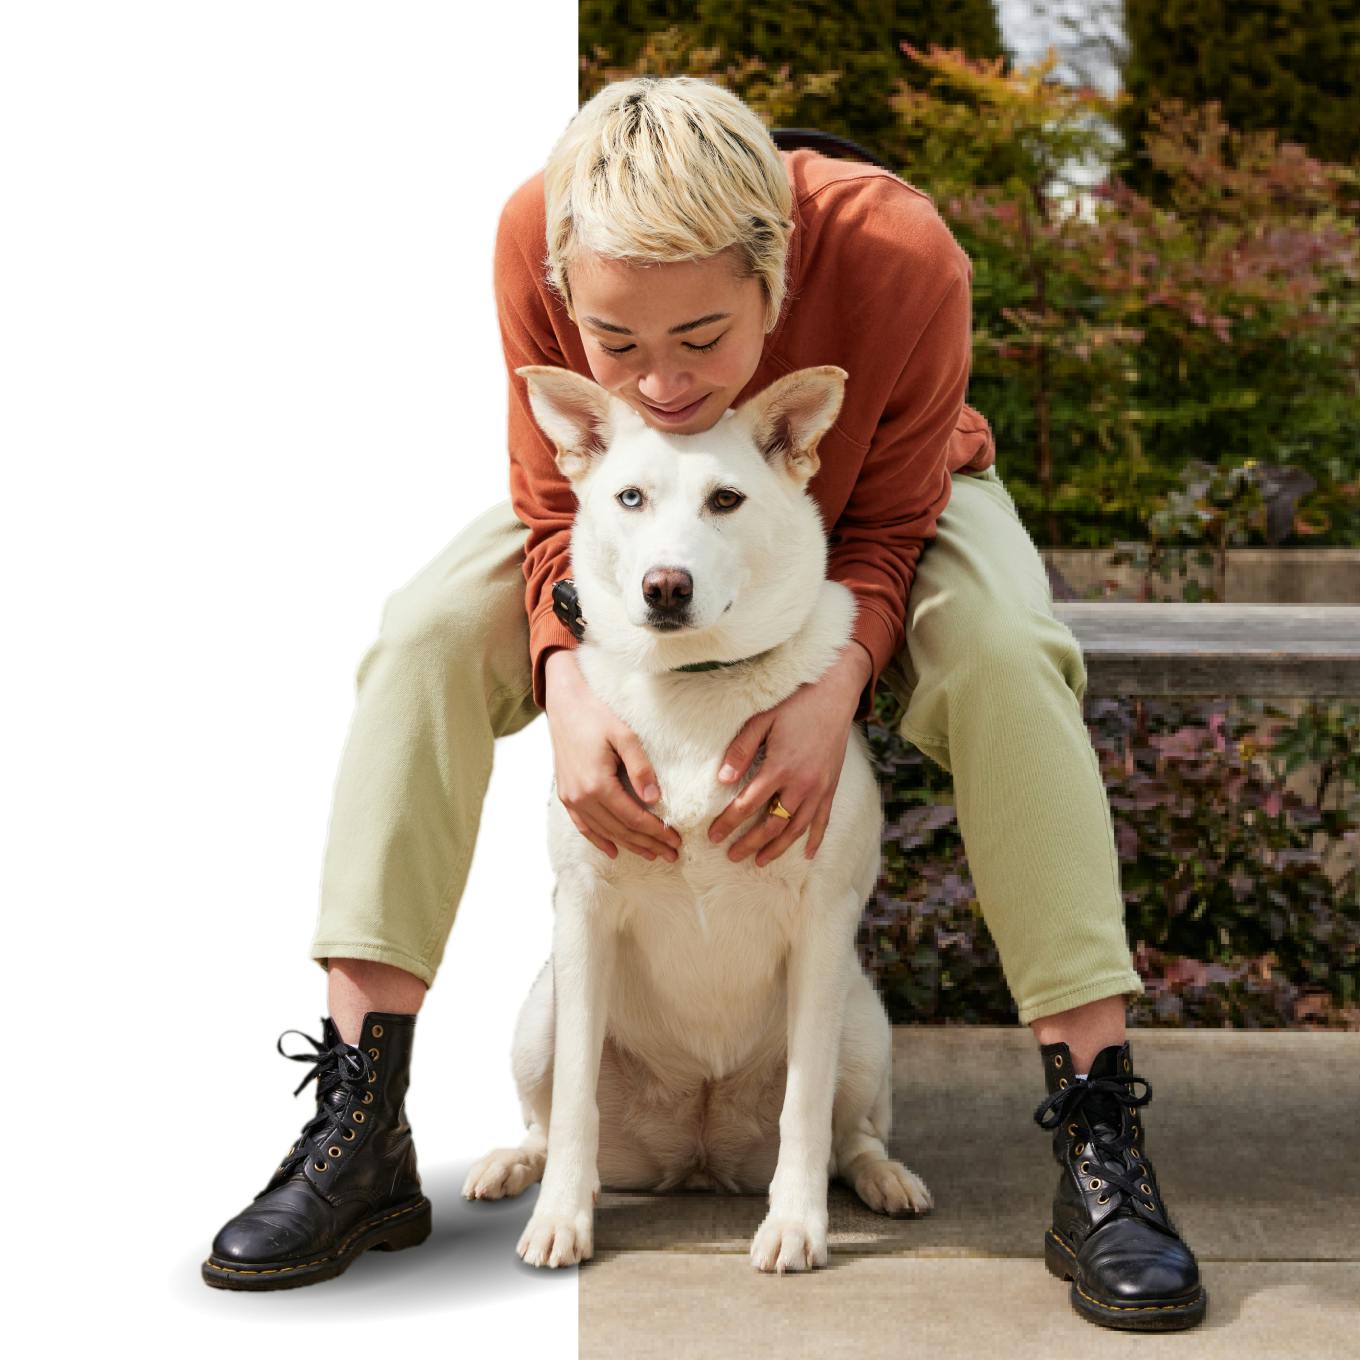 A person hugging a white shepherd dog.